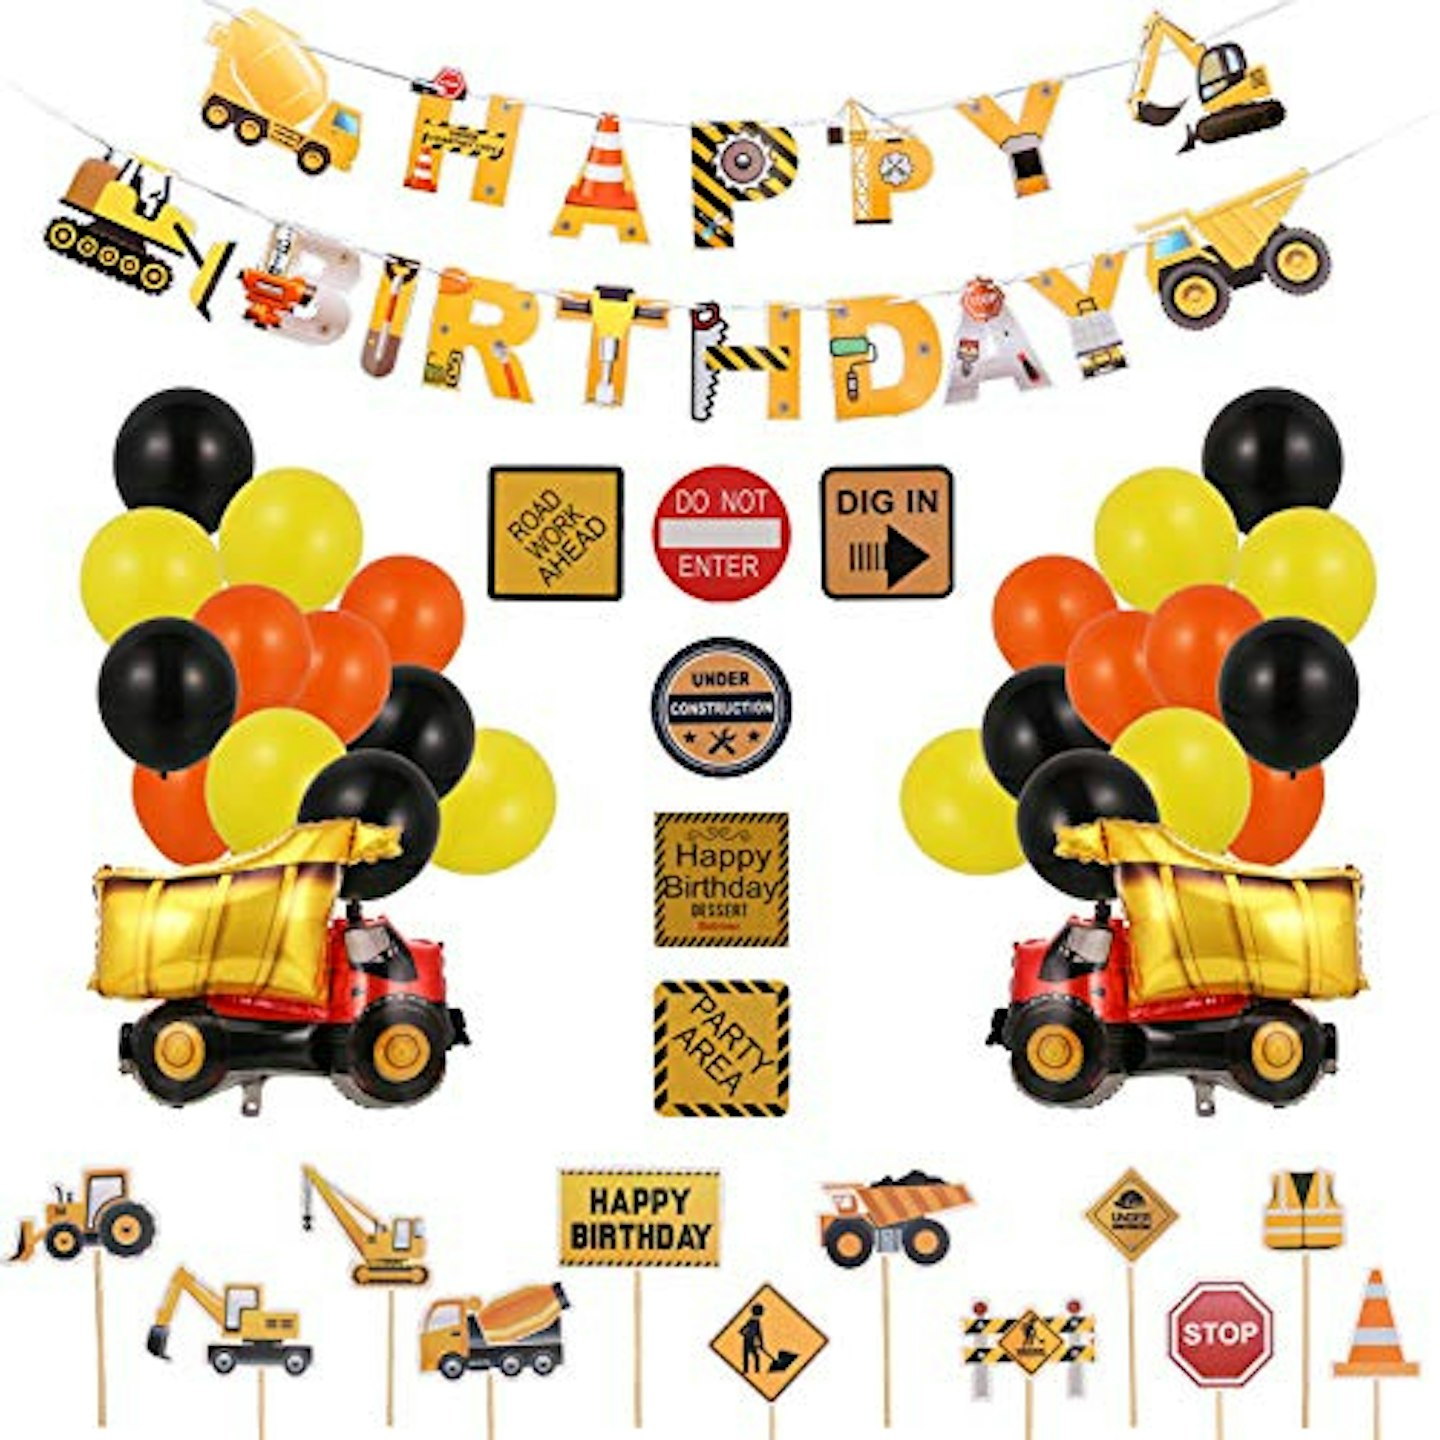 Popuppe Construction Birthday Supplies Sets with 48 Pieces